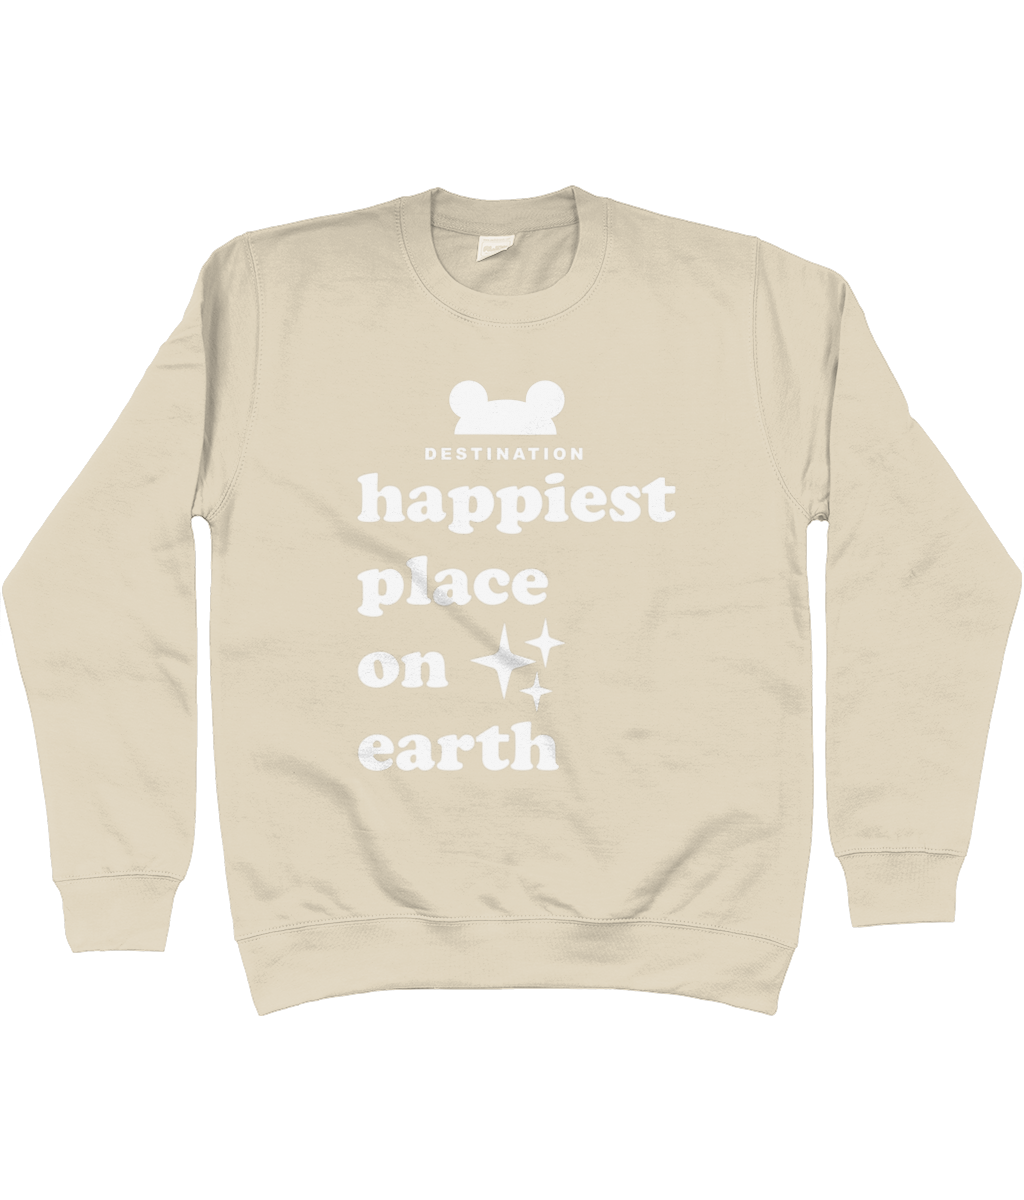 Nude Destination Happiest Place On Earth Travel Day Sweatshirt Unisex